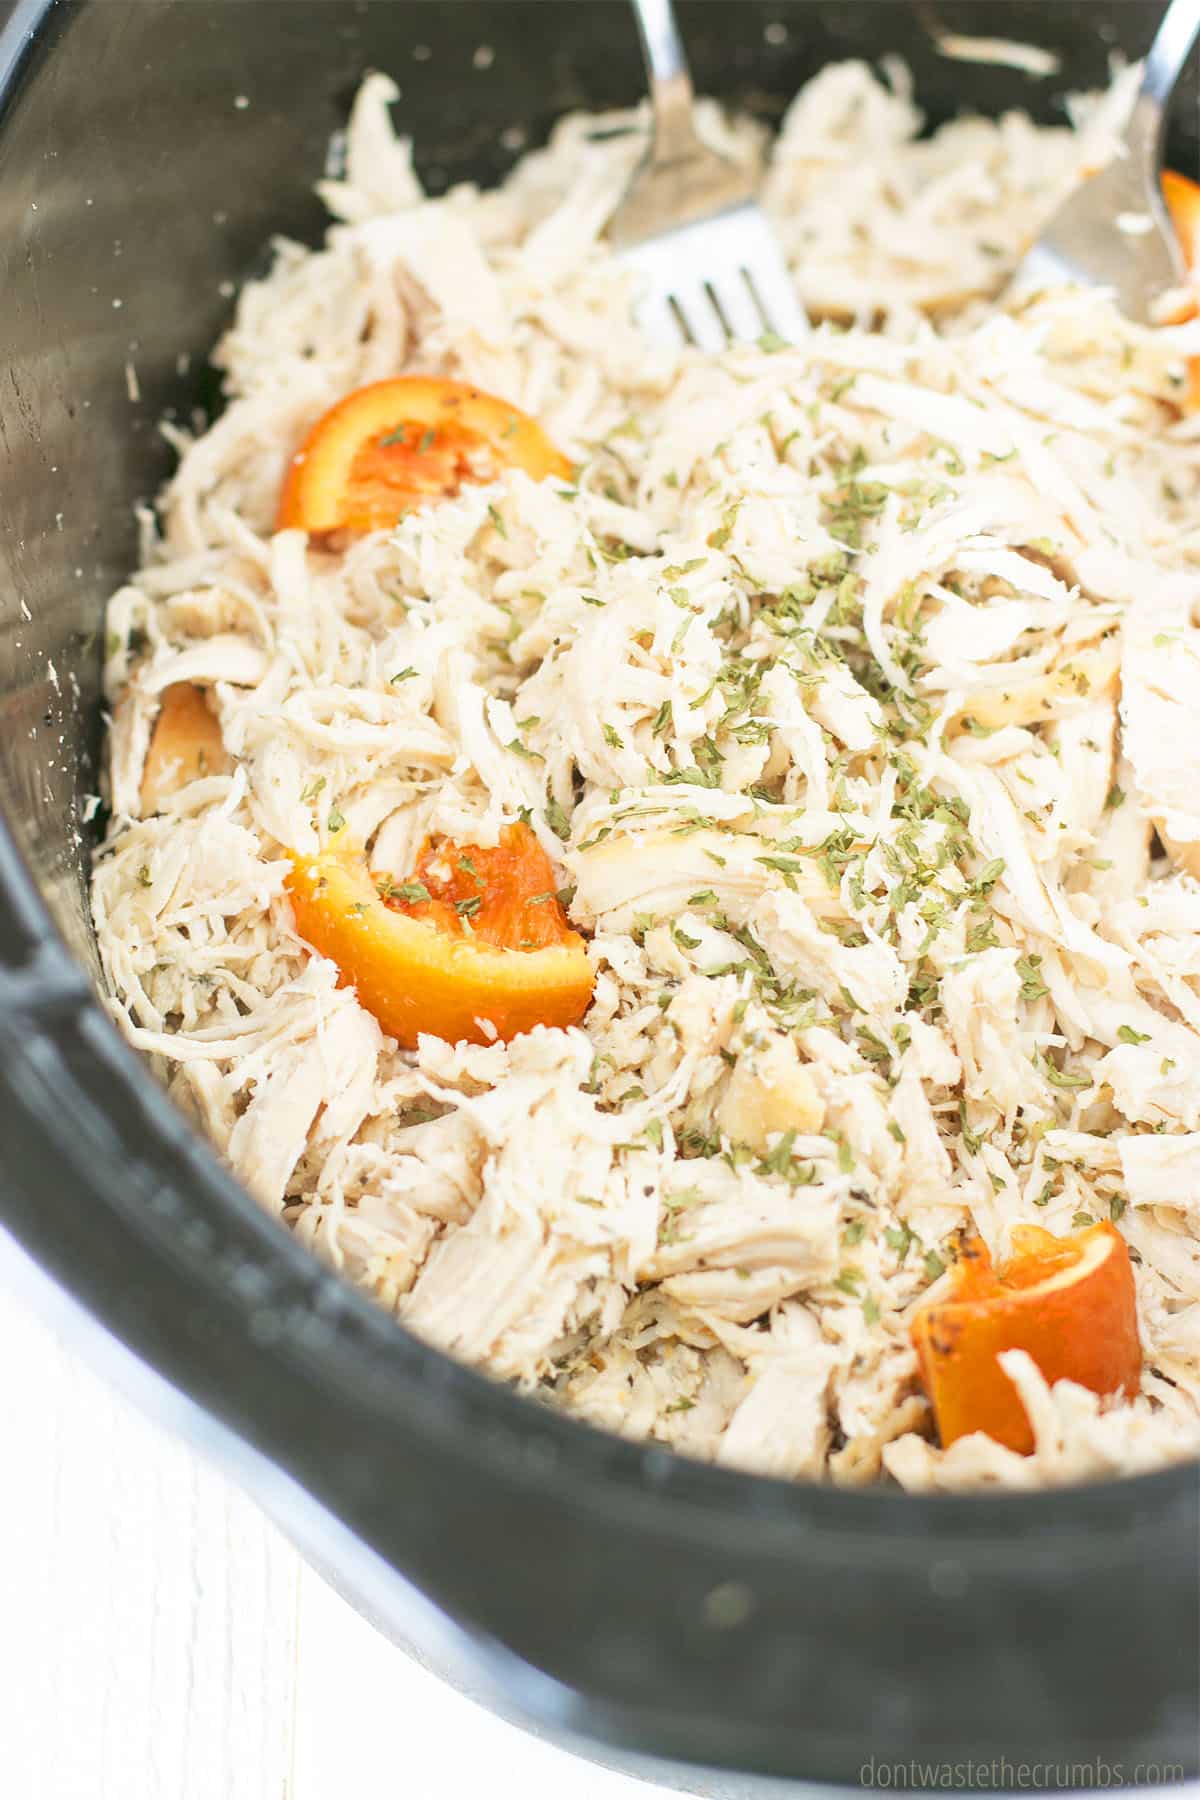 Slow cooker with shredded chicken and seasoning and slices of oranges.